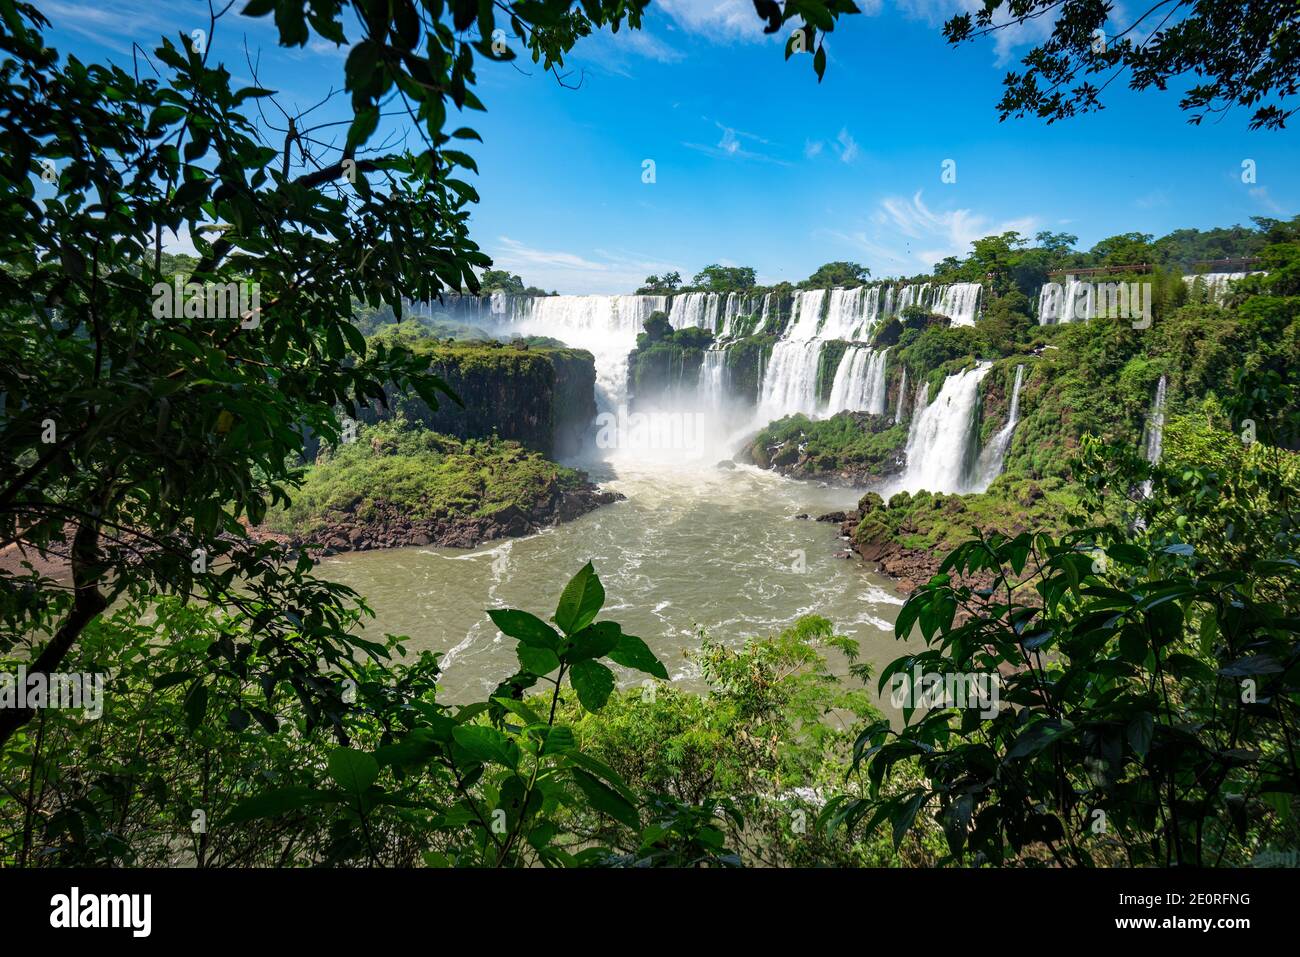 View of Iguazu Falls, One of the Seven New Wonders of Nature, in Brazil and Argentina Stock Photo